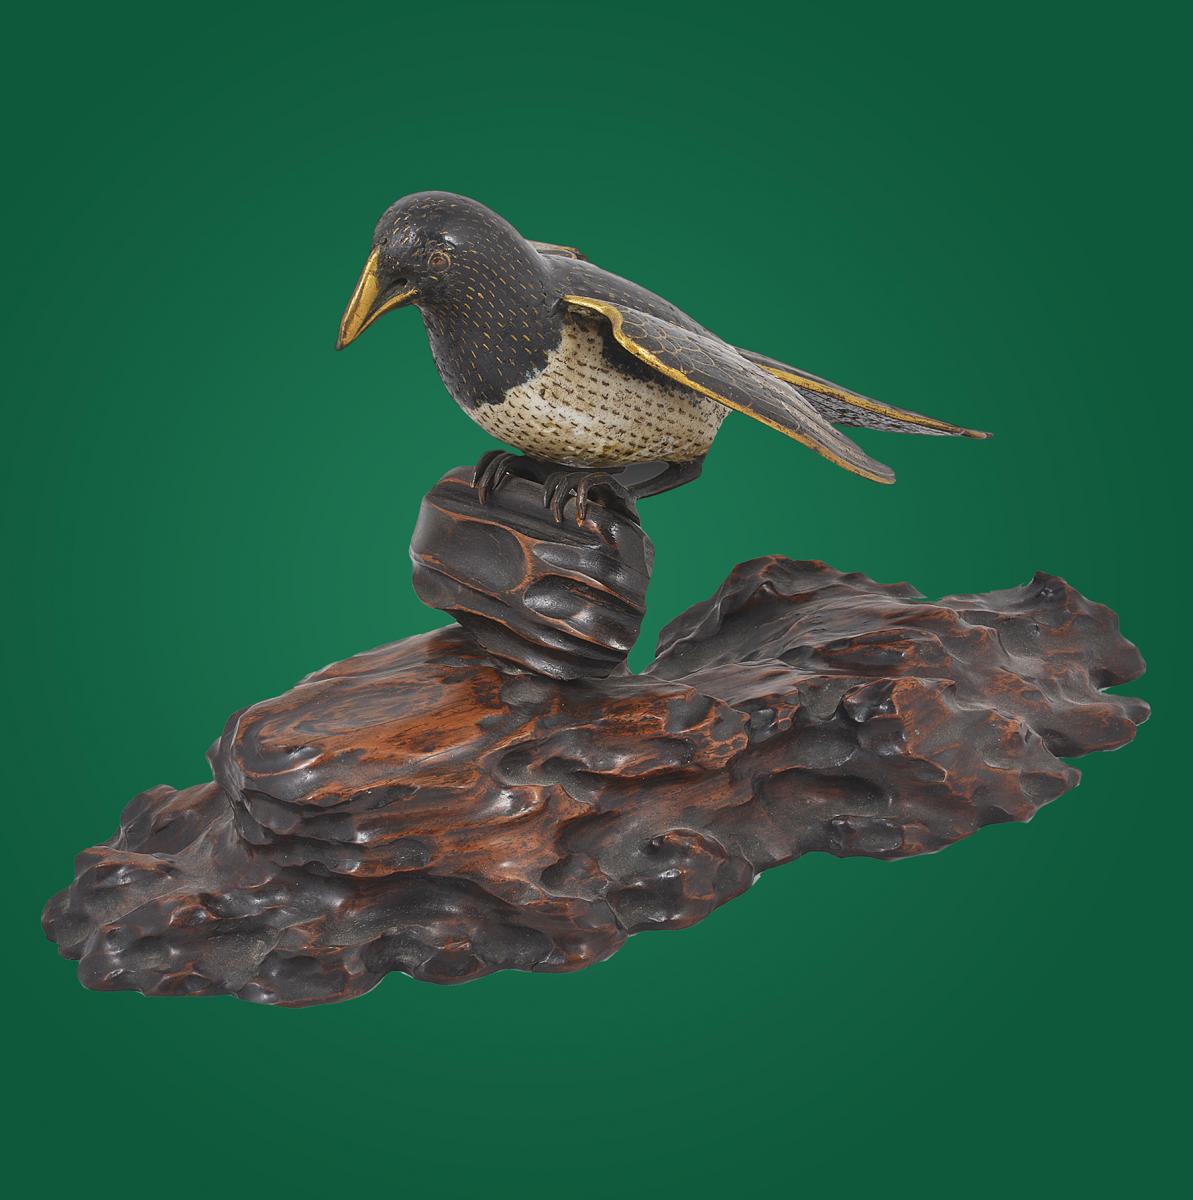 A rotating Clossione magpie perched on a wooden stand